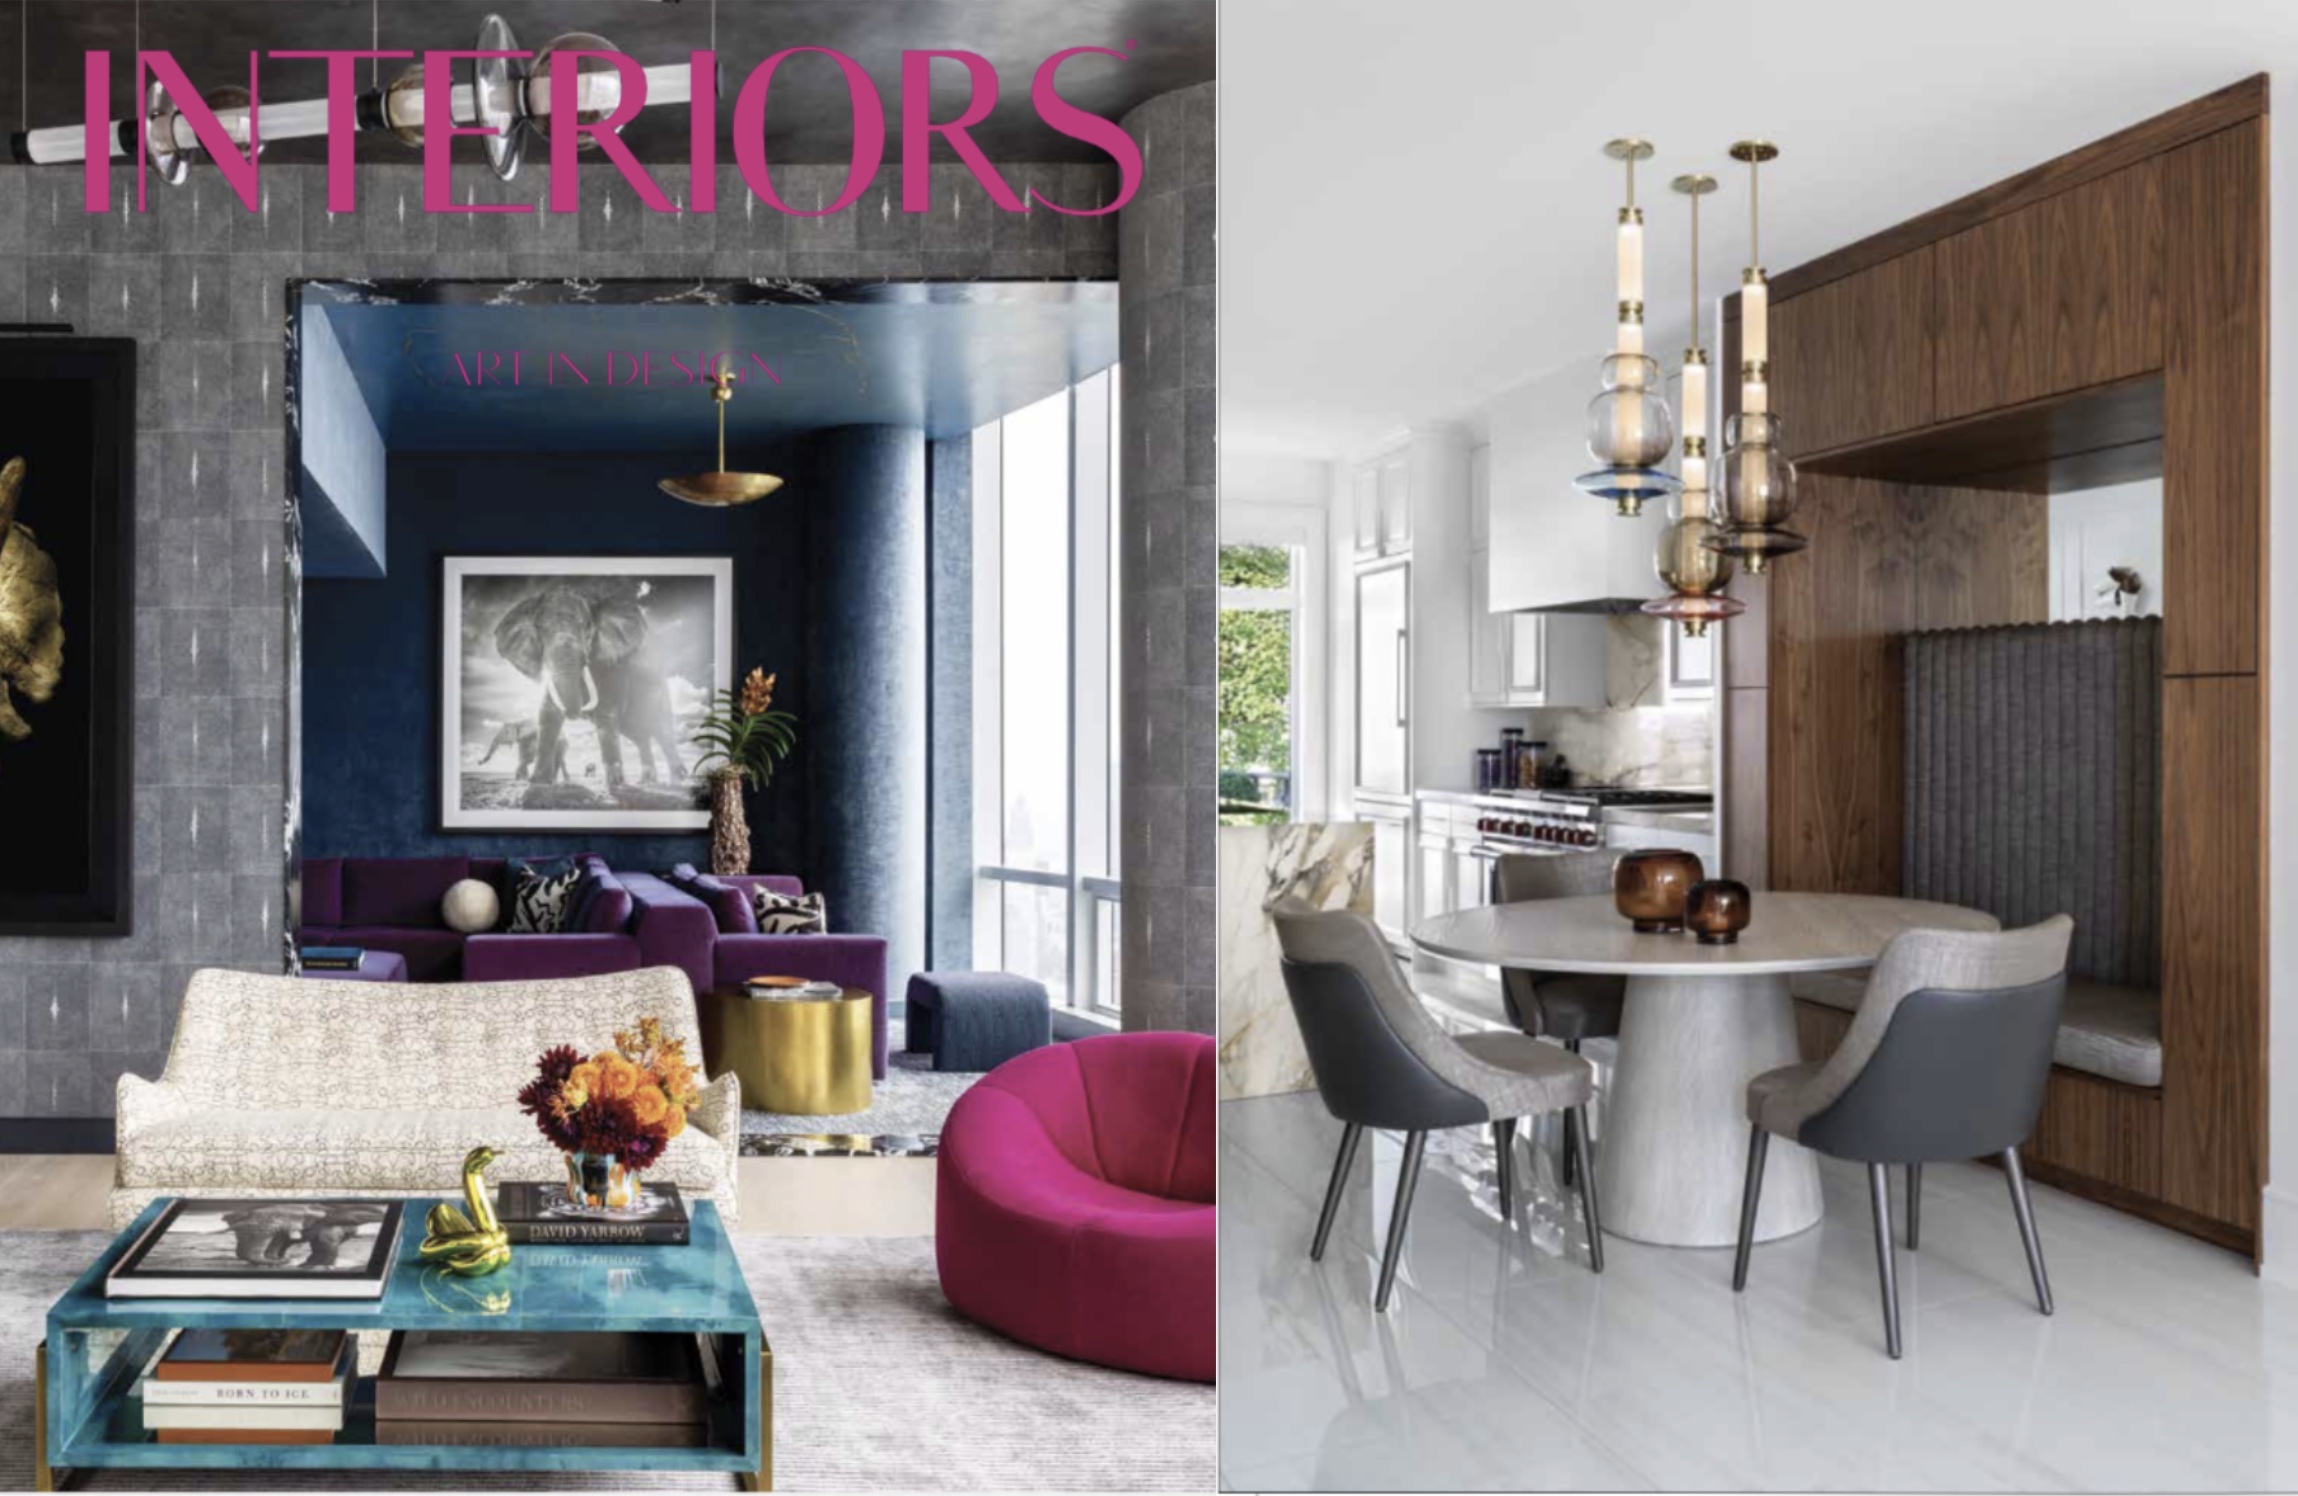 Interiors apr may cover